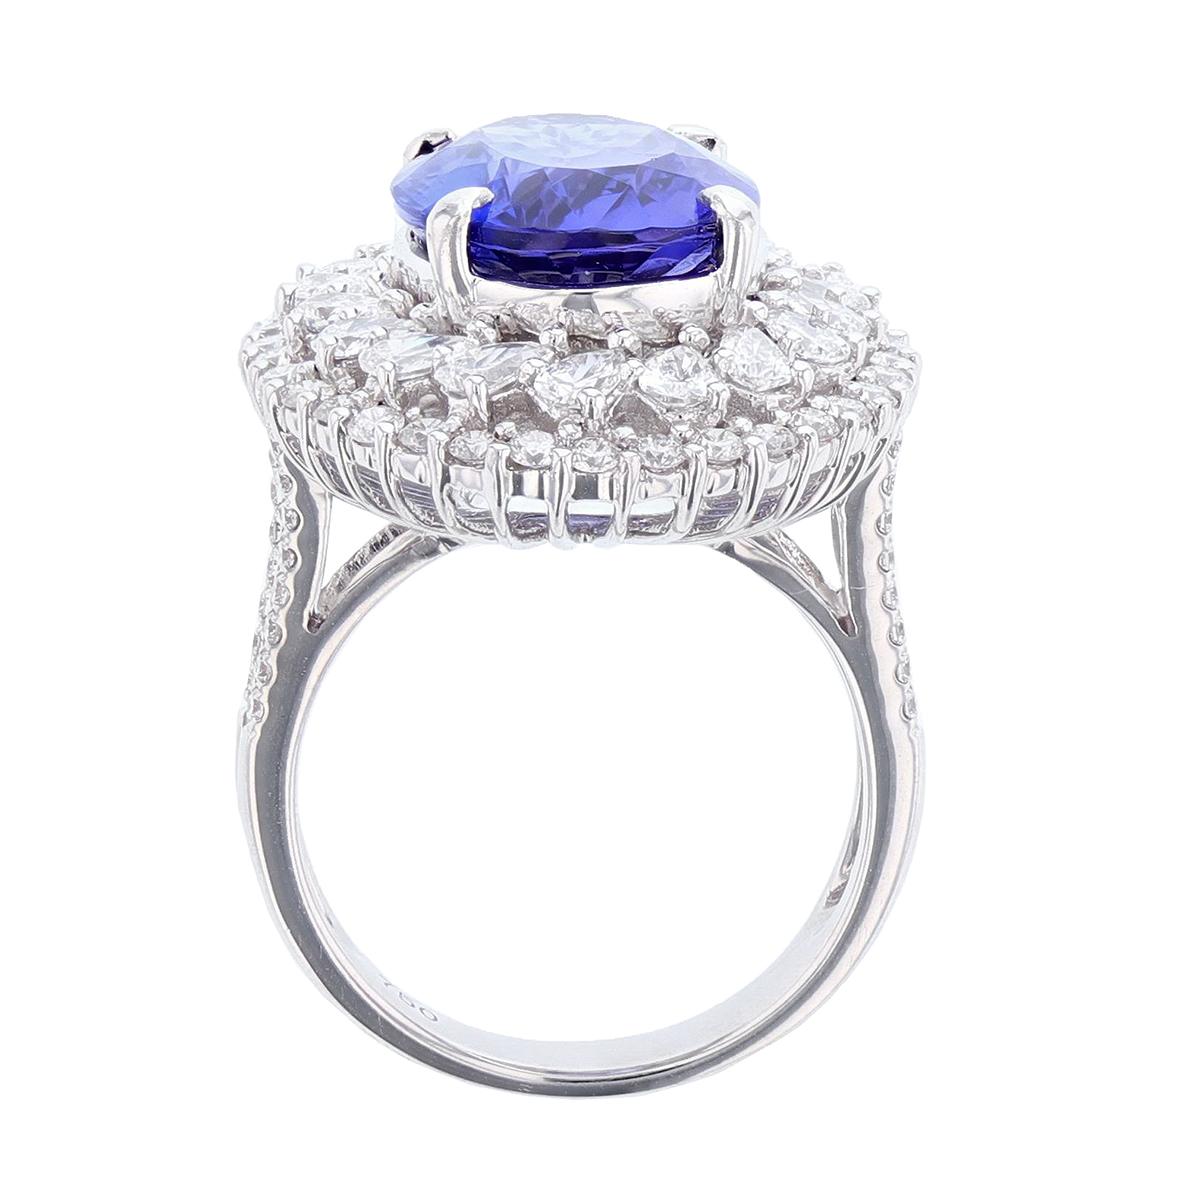 Contemporary 18 Karat White Gold 6.53 Carat Oval Tanzanite and Diamond Ring For Sale